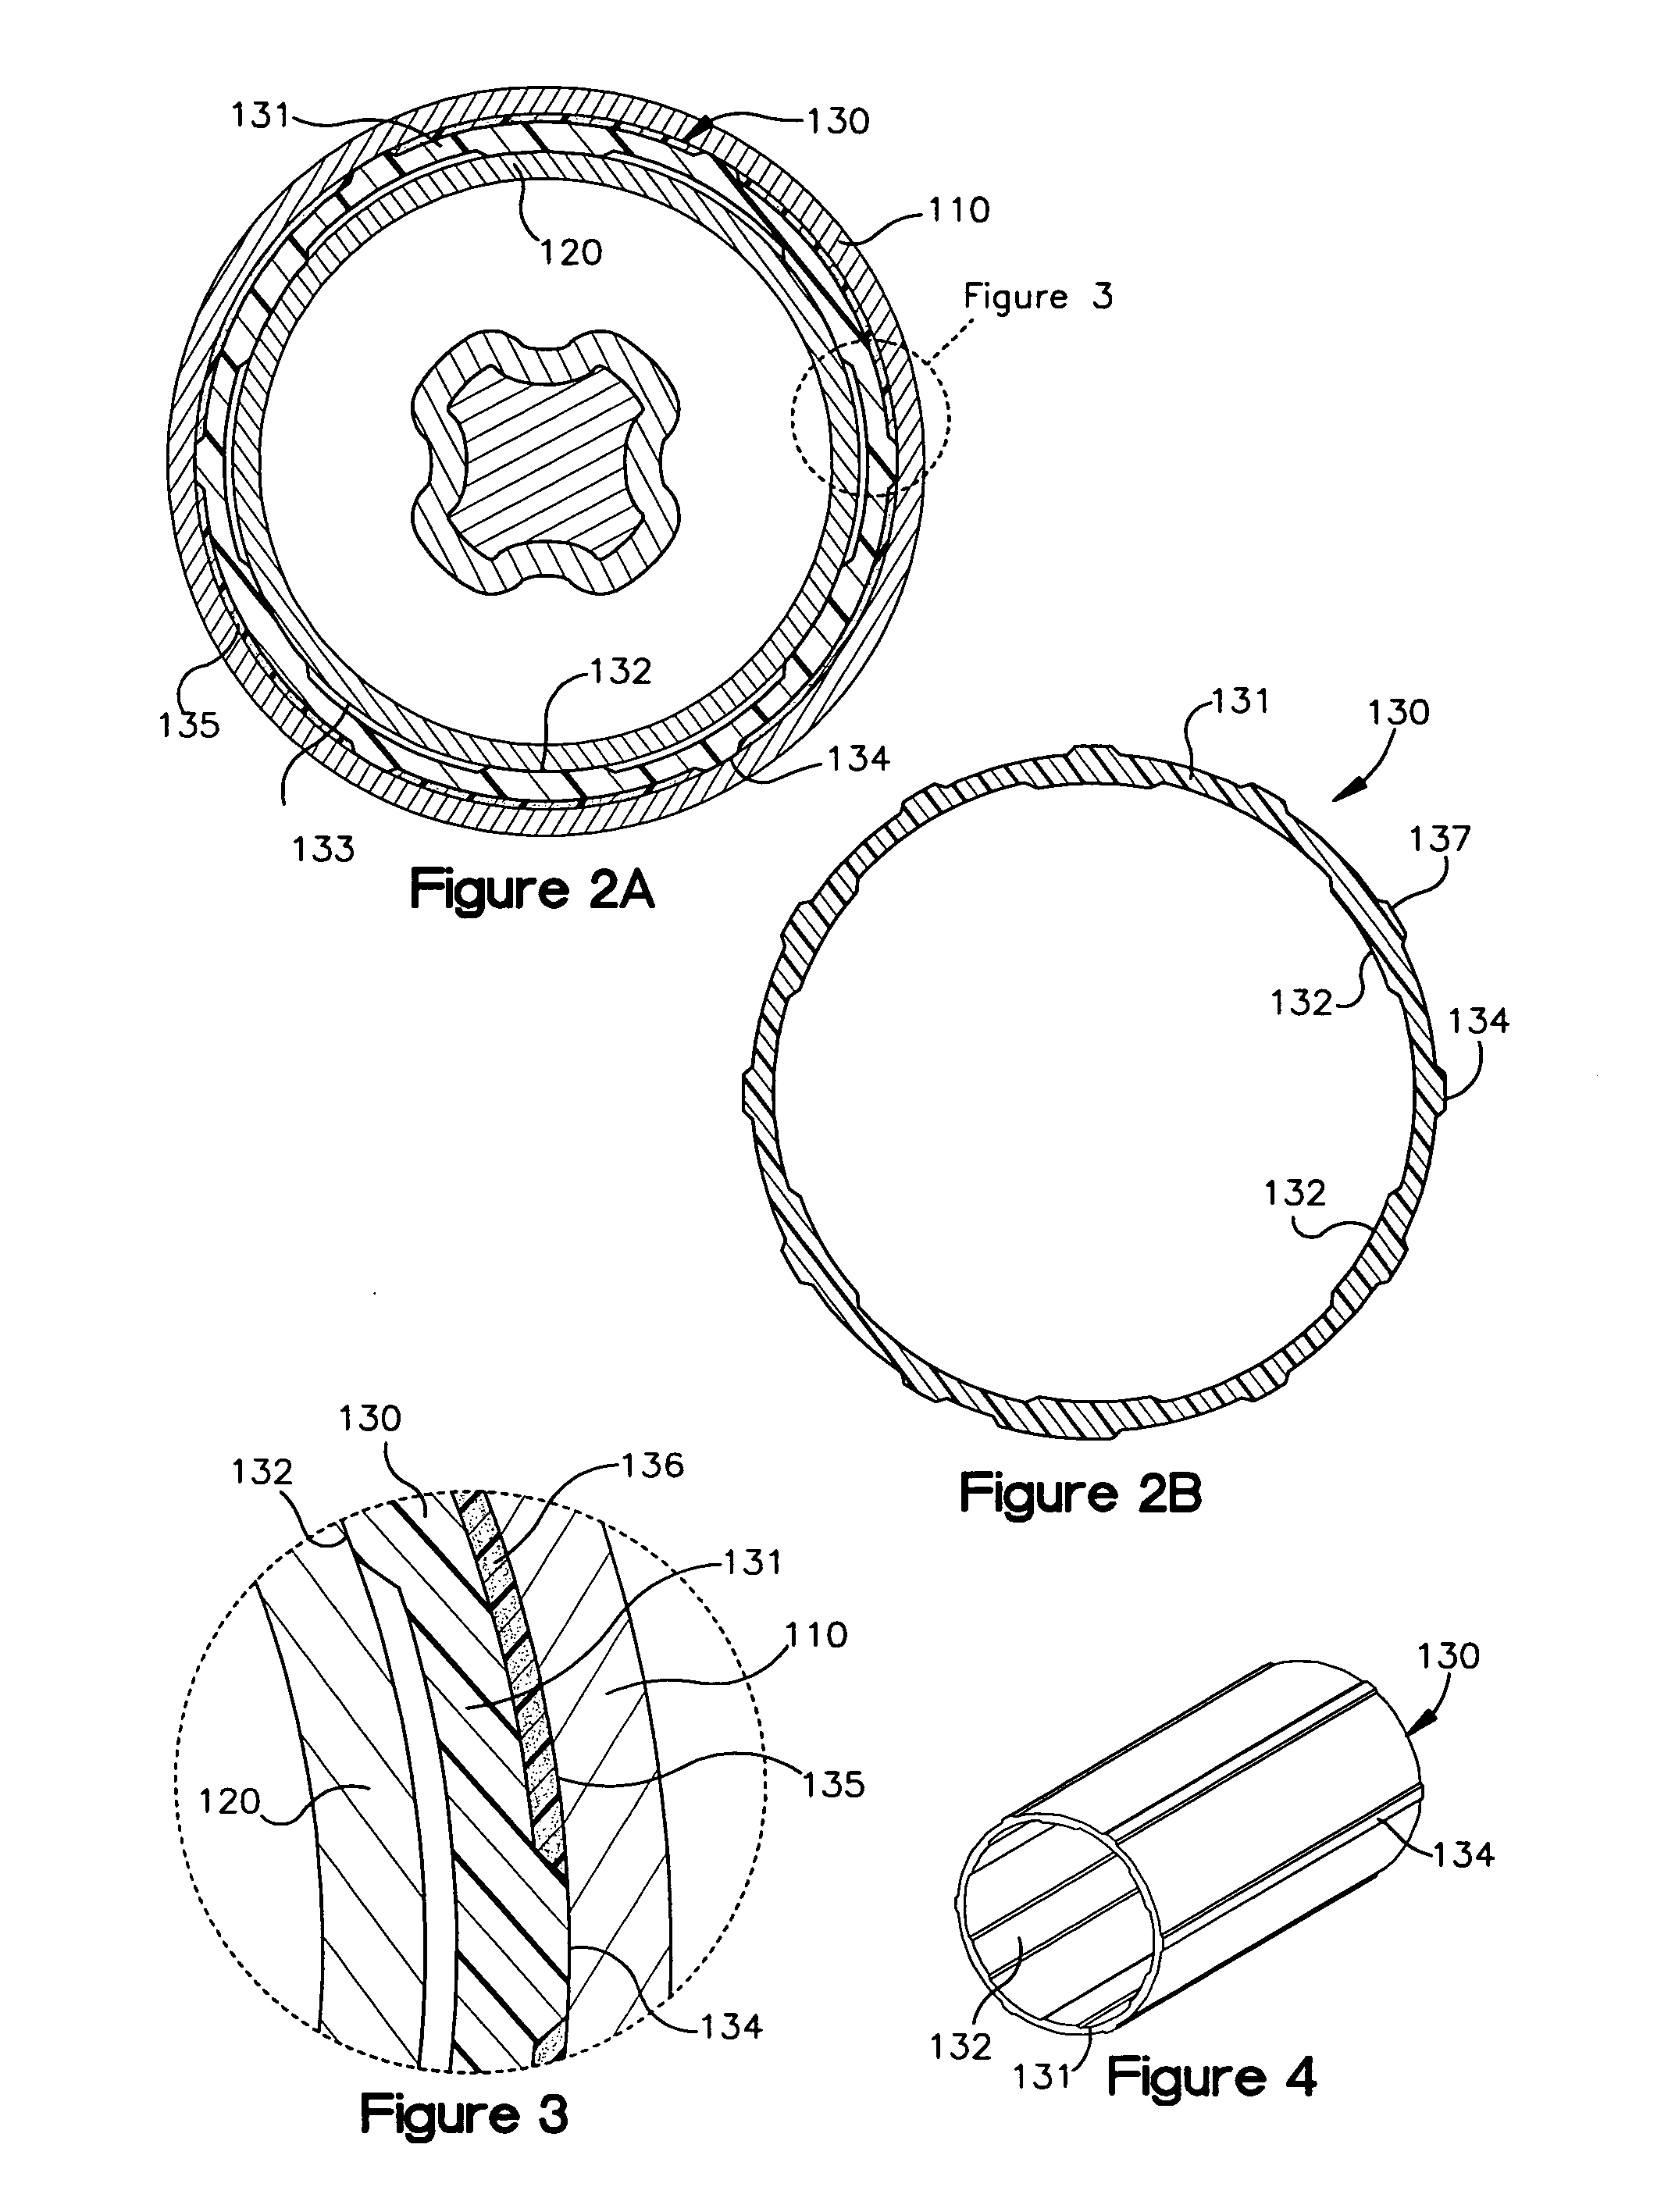 Axially adjustable steering column assembly with flexible bearing sleeve